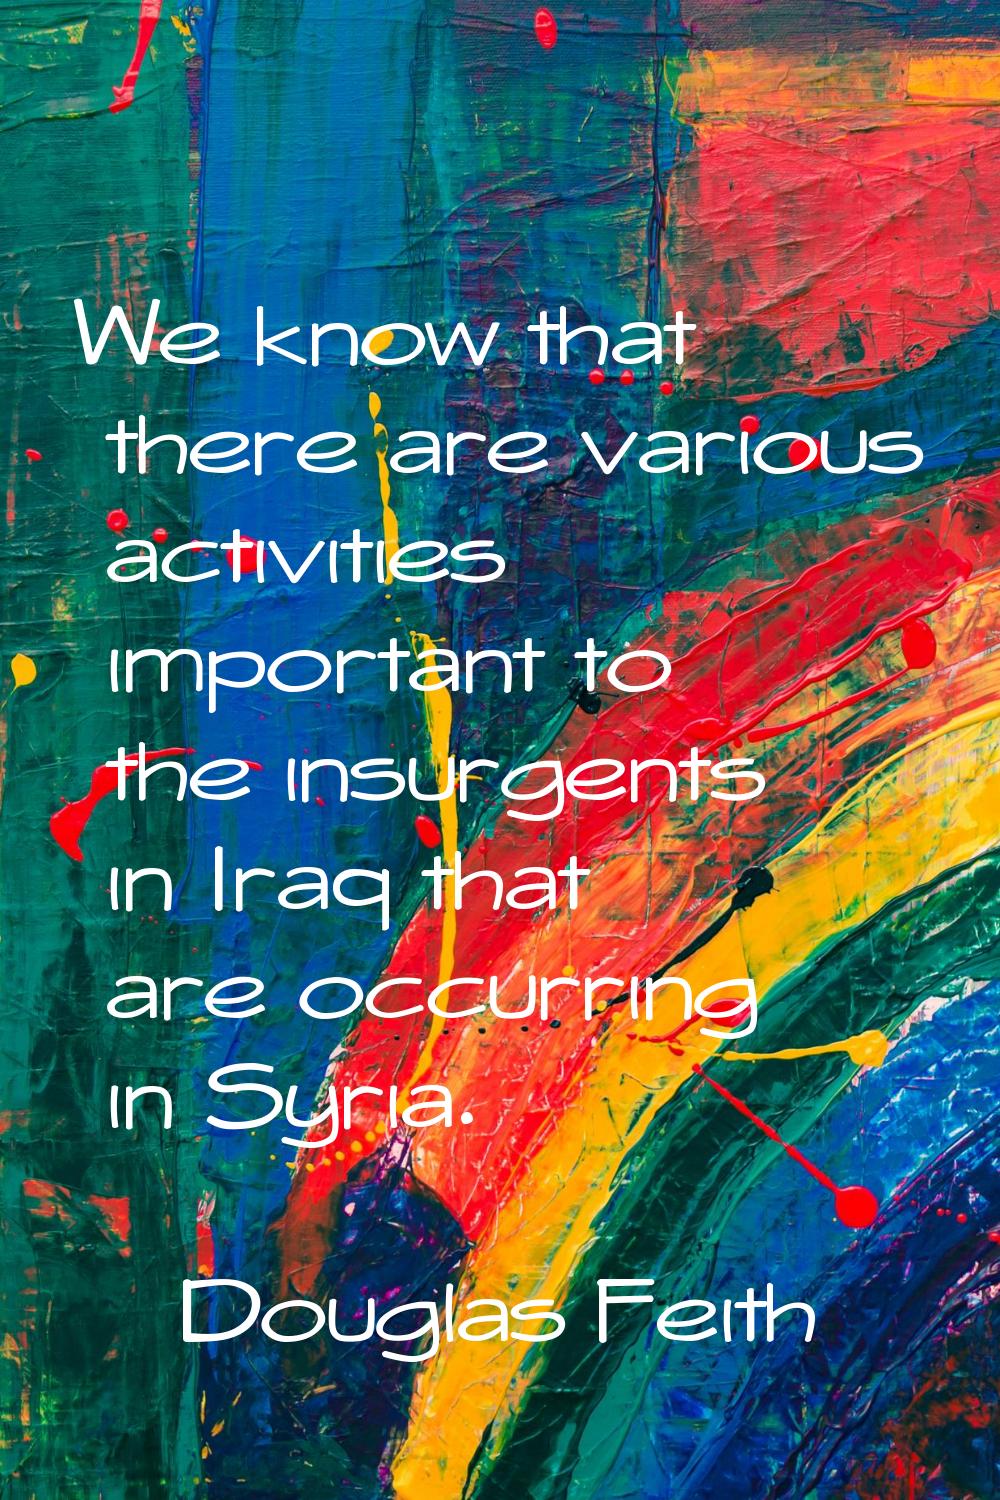 We know that there are various activities important to the insurgents in Iraq that are occurring in